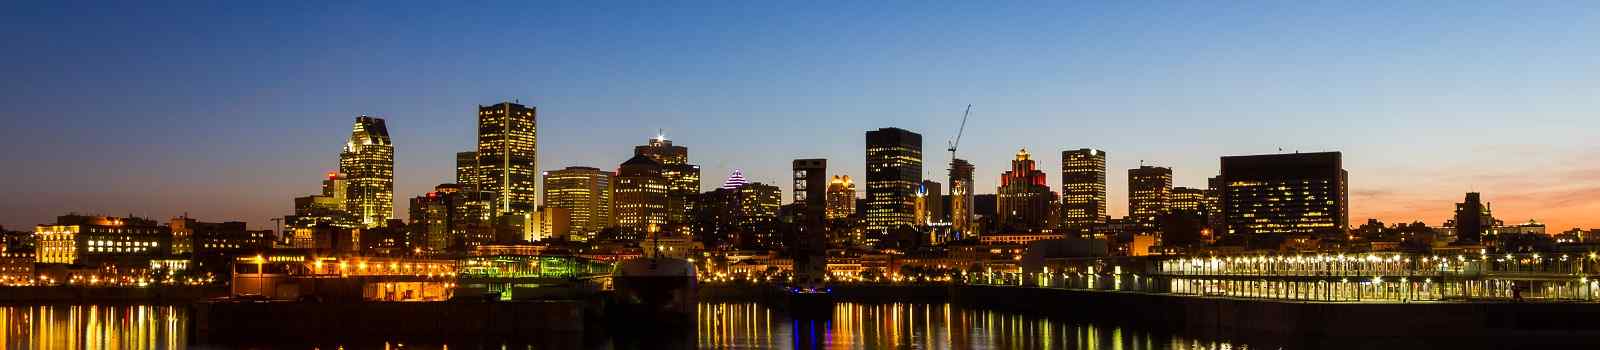 ROUTE-VOYAGEURS montreal quebec city skyline at night shutterstock 142337923